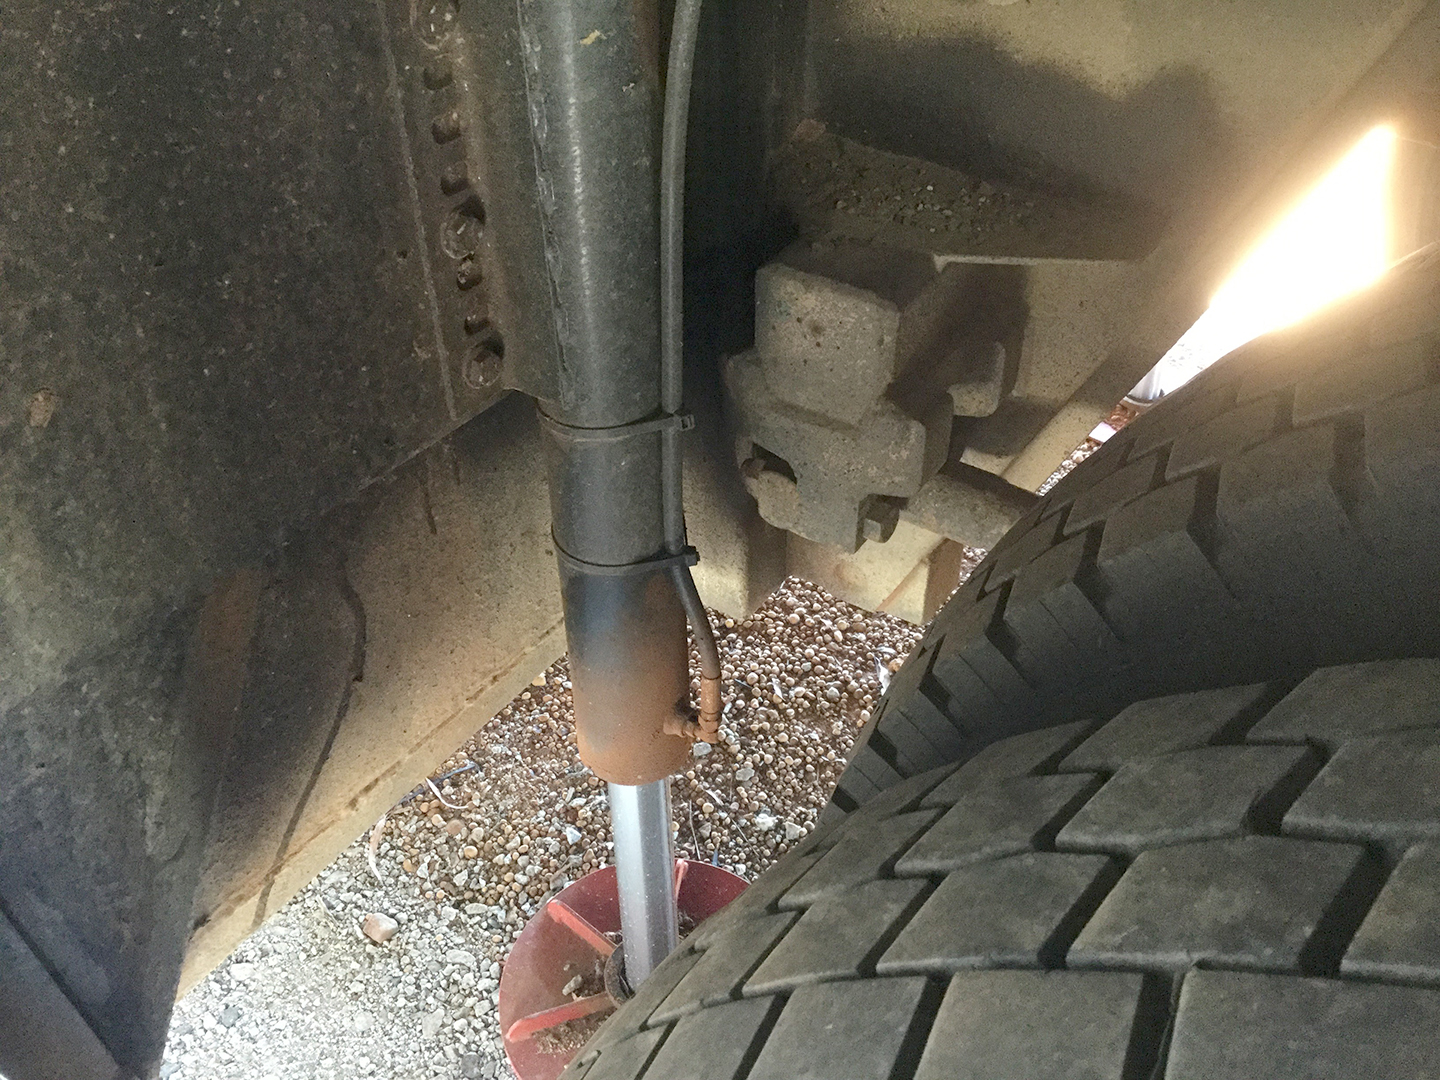 Redfoot Levelling - The underside of a truck with a tire on it.